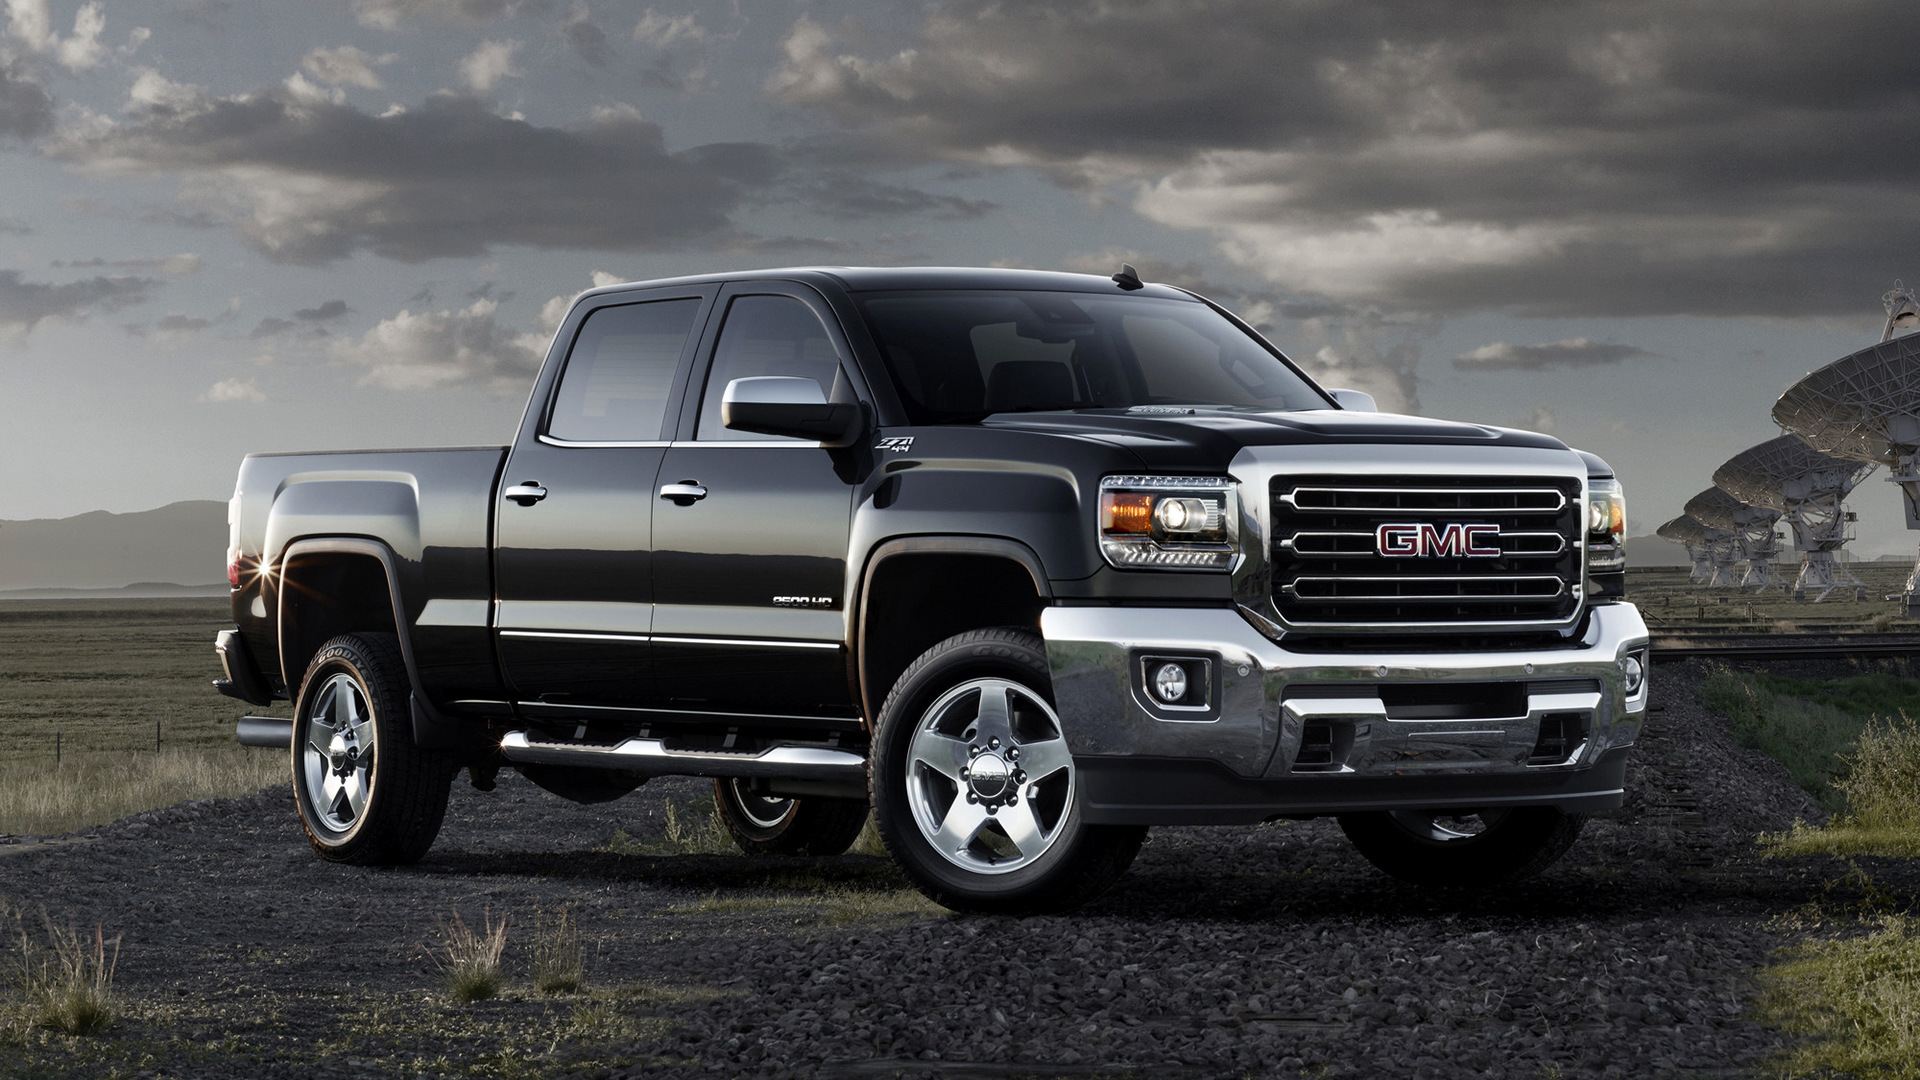 Gmc Sierra 2500 Hd Slt Crew Cab 2015 Wallpapers And Hd Images Car Pixel